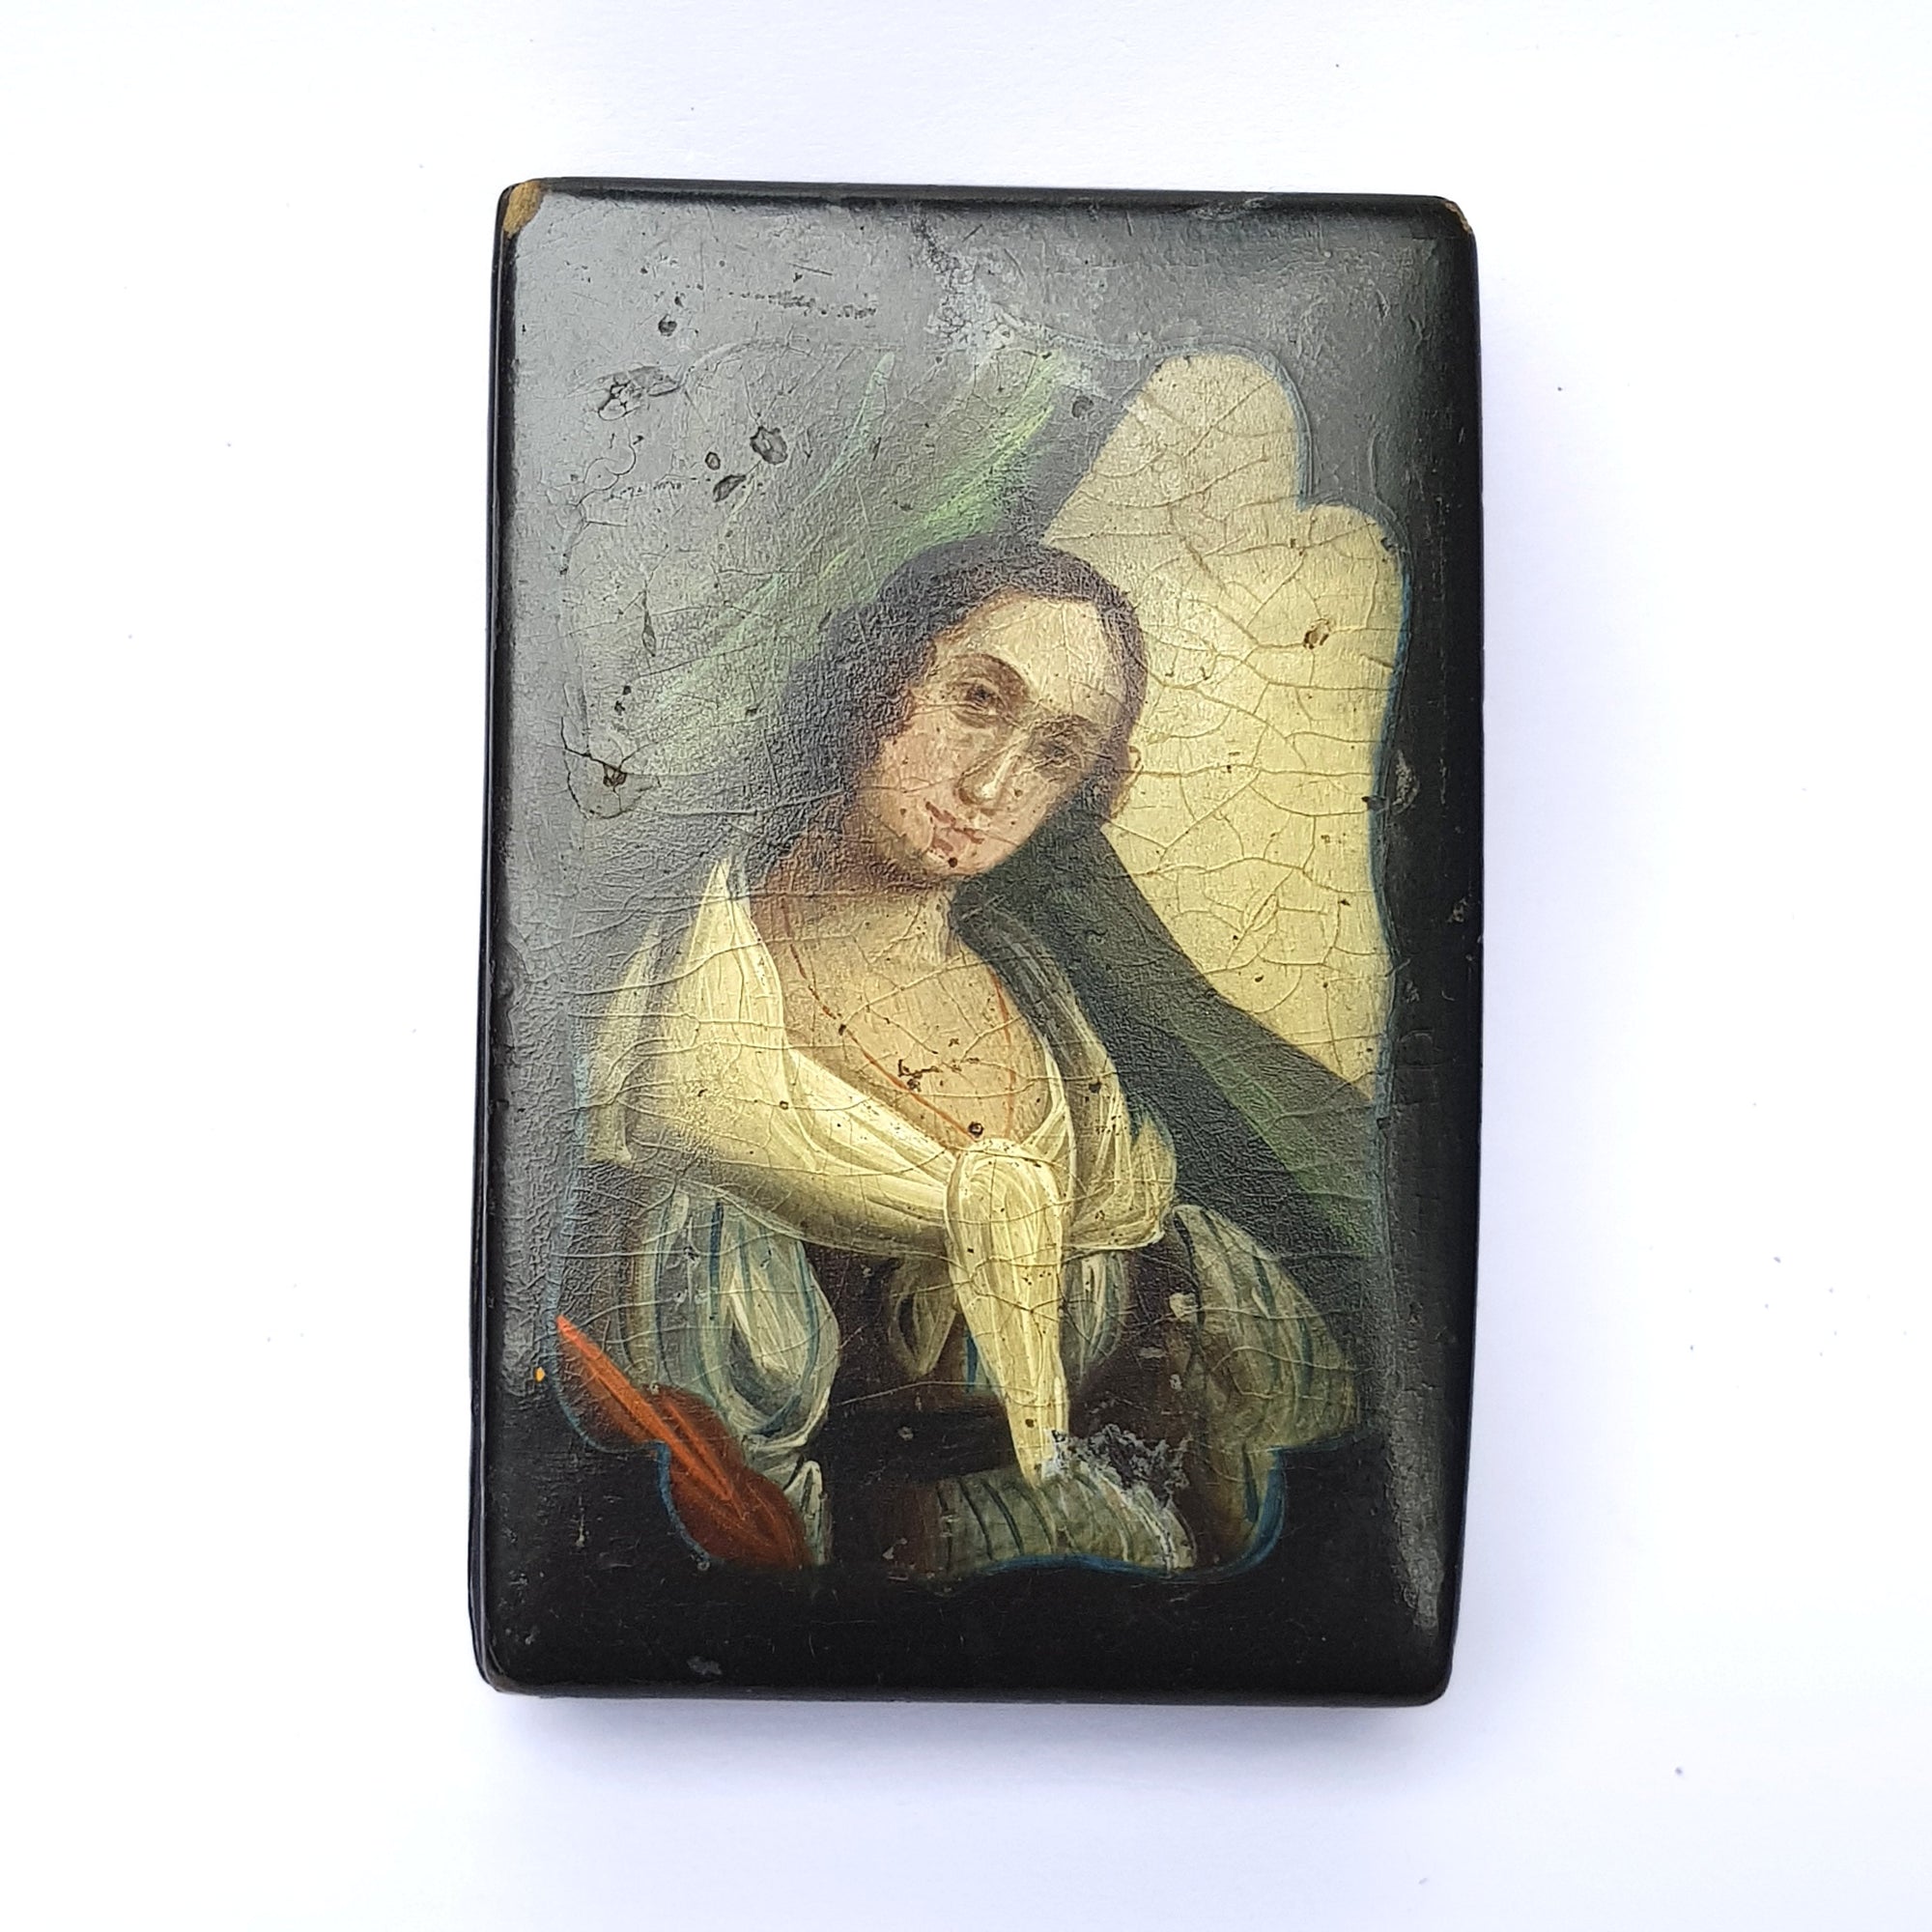 Rare Gouache Hand Painted Pocket Snuff Box With Portrait Of A Lady Antique Russian Nicholas I  19th Century Circa 1850's